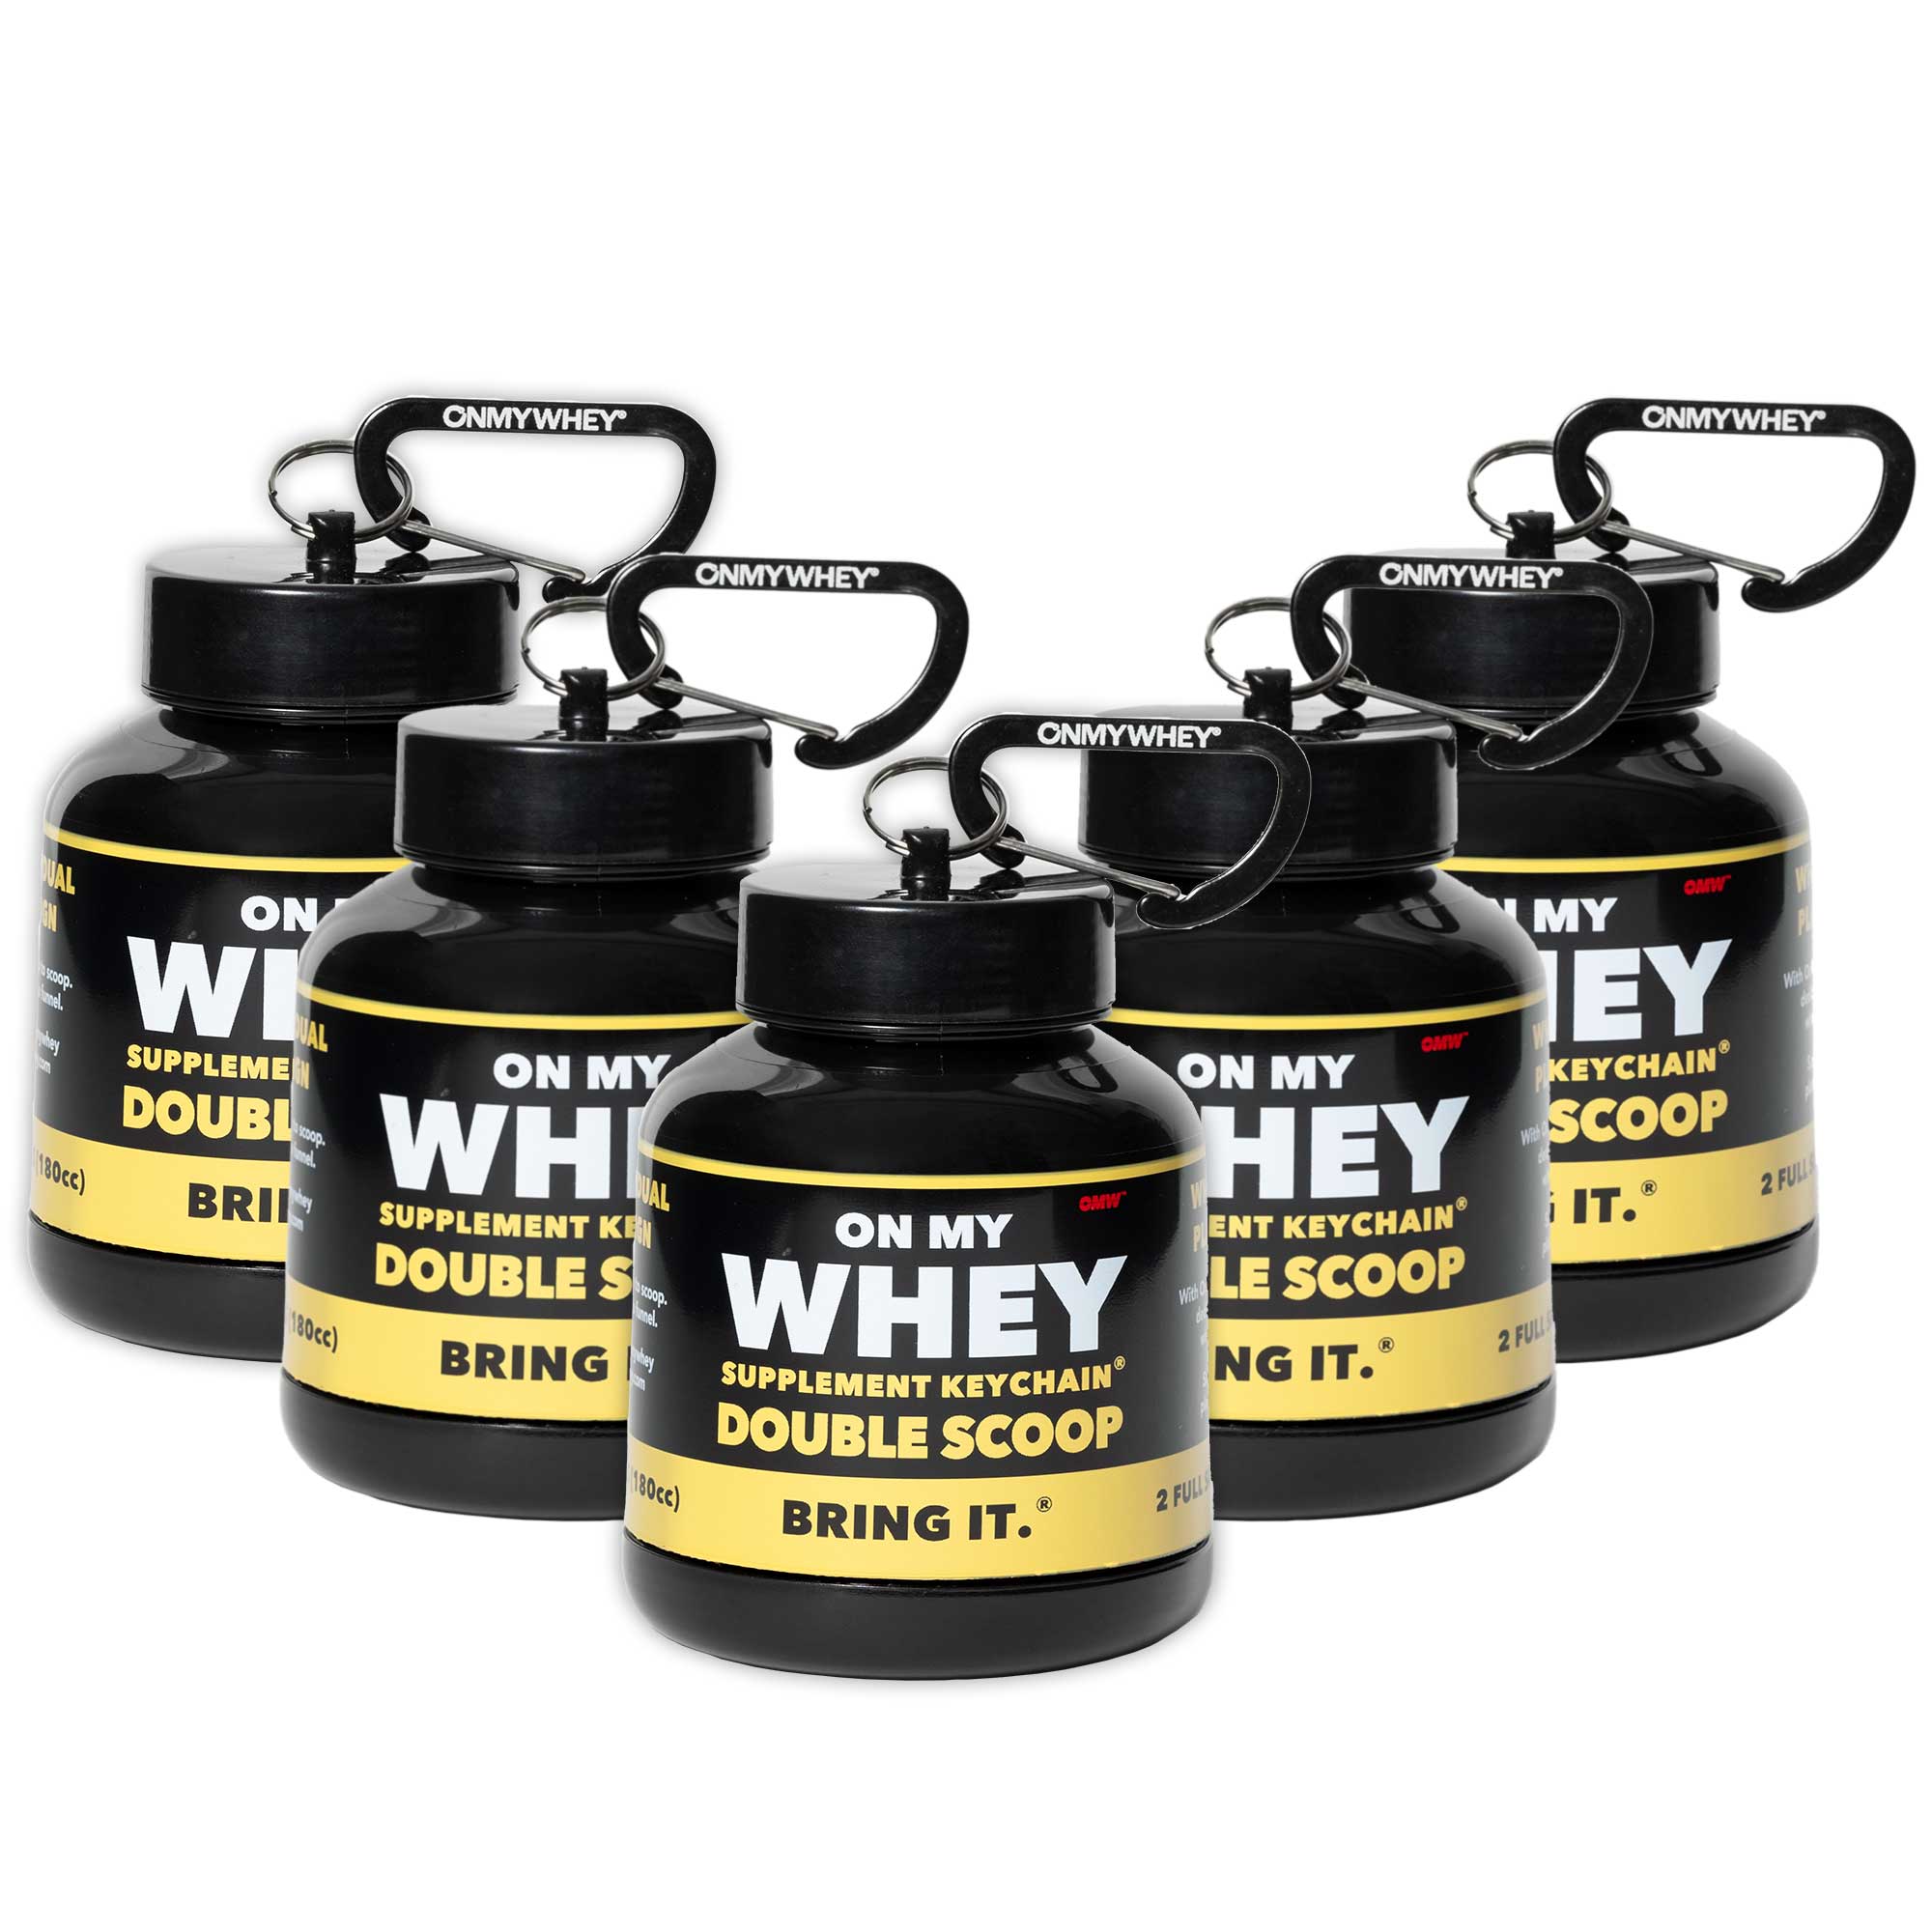 OnMyWhey - Portable Protein and Supplement Powder Funnel Key-Chain - Modern  5-Pack 